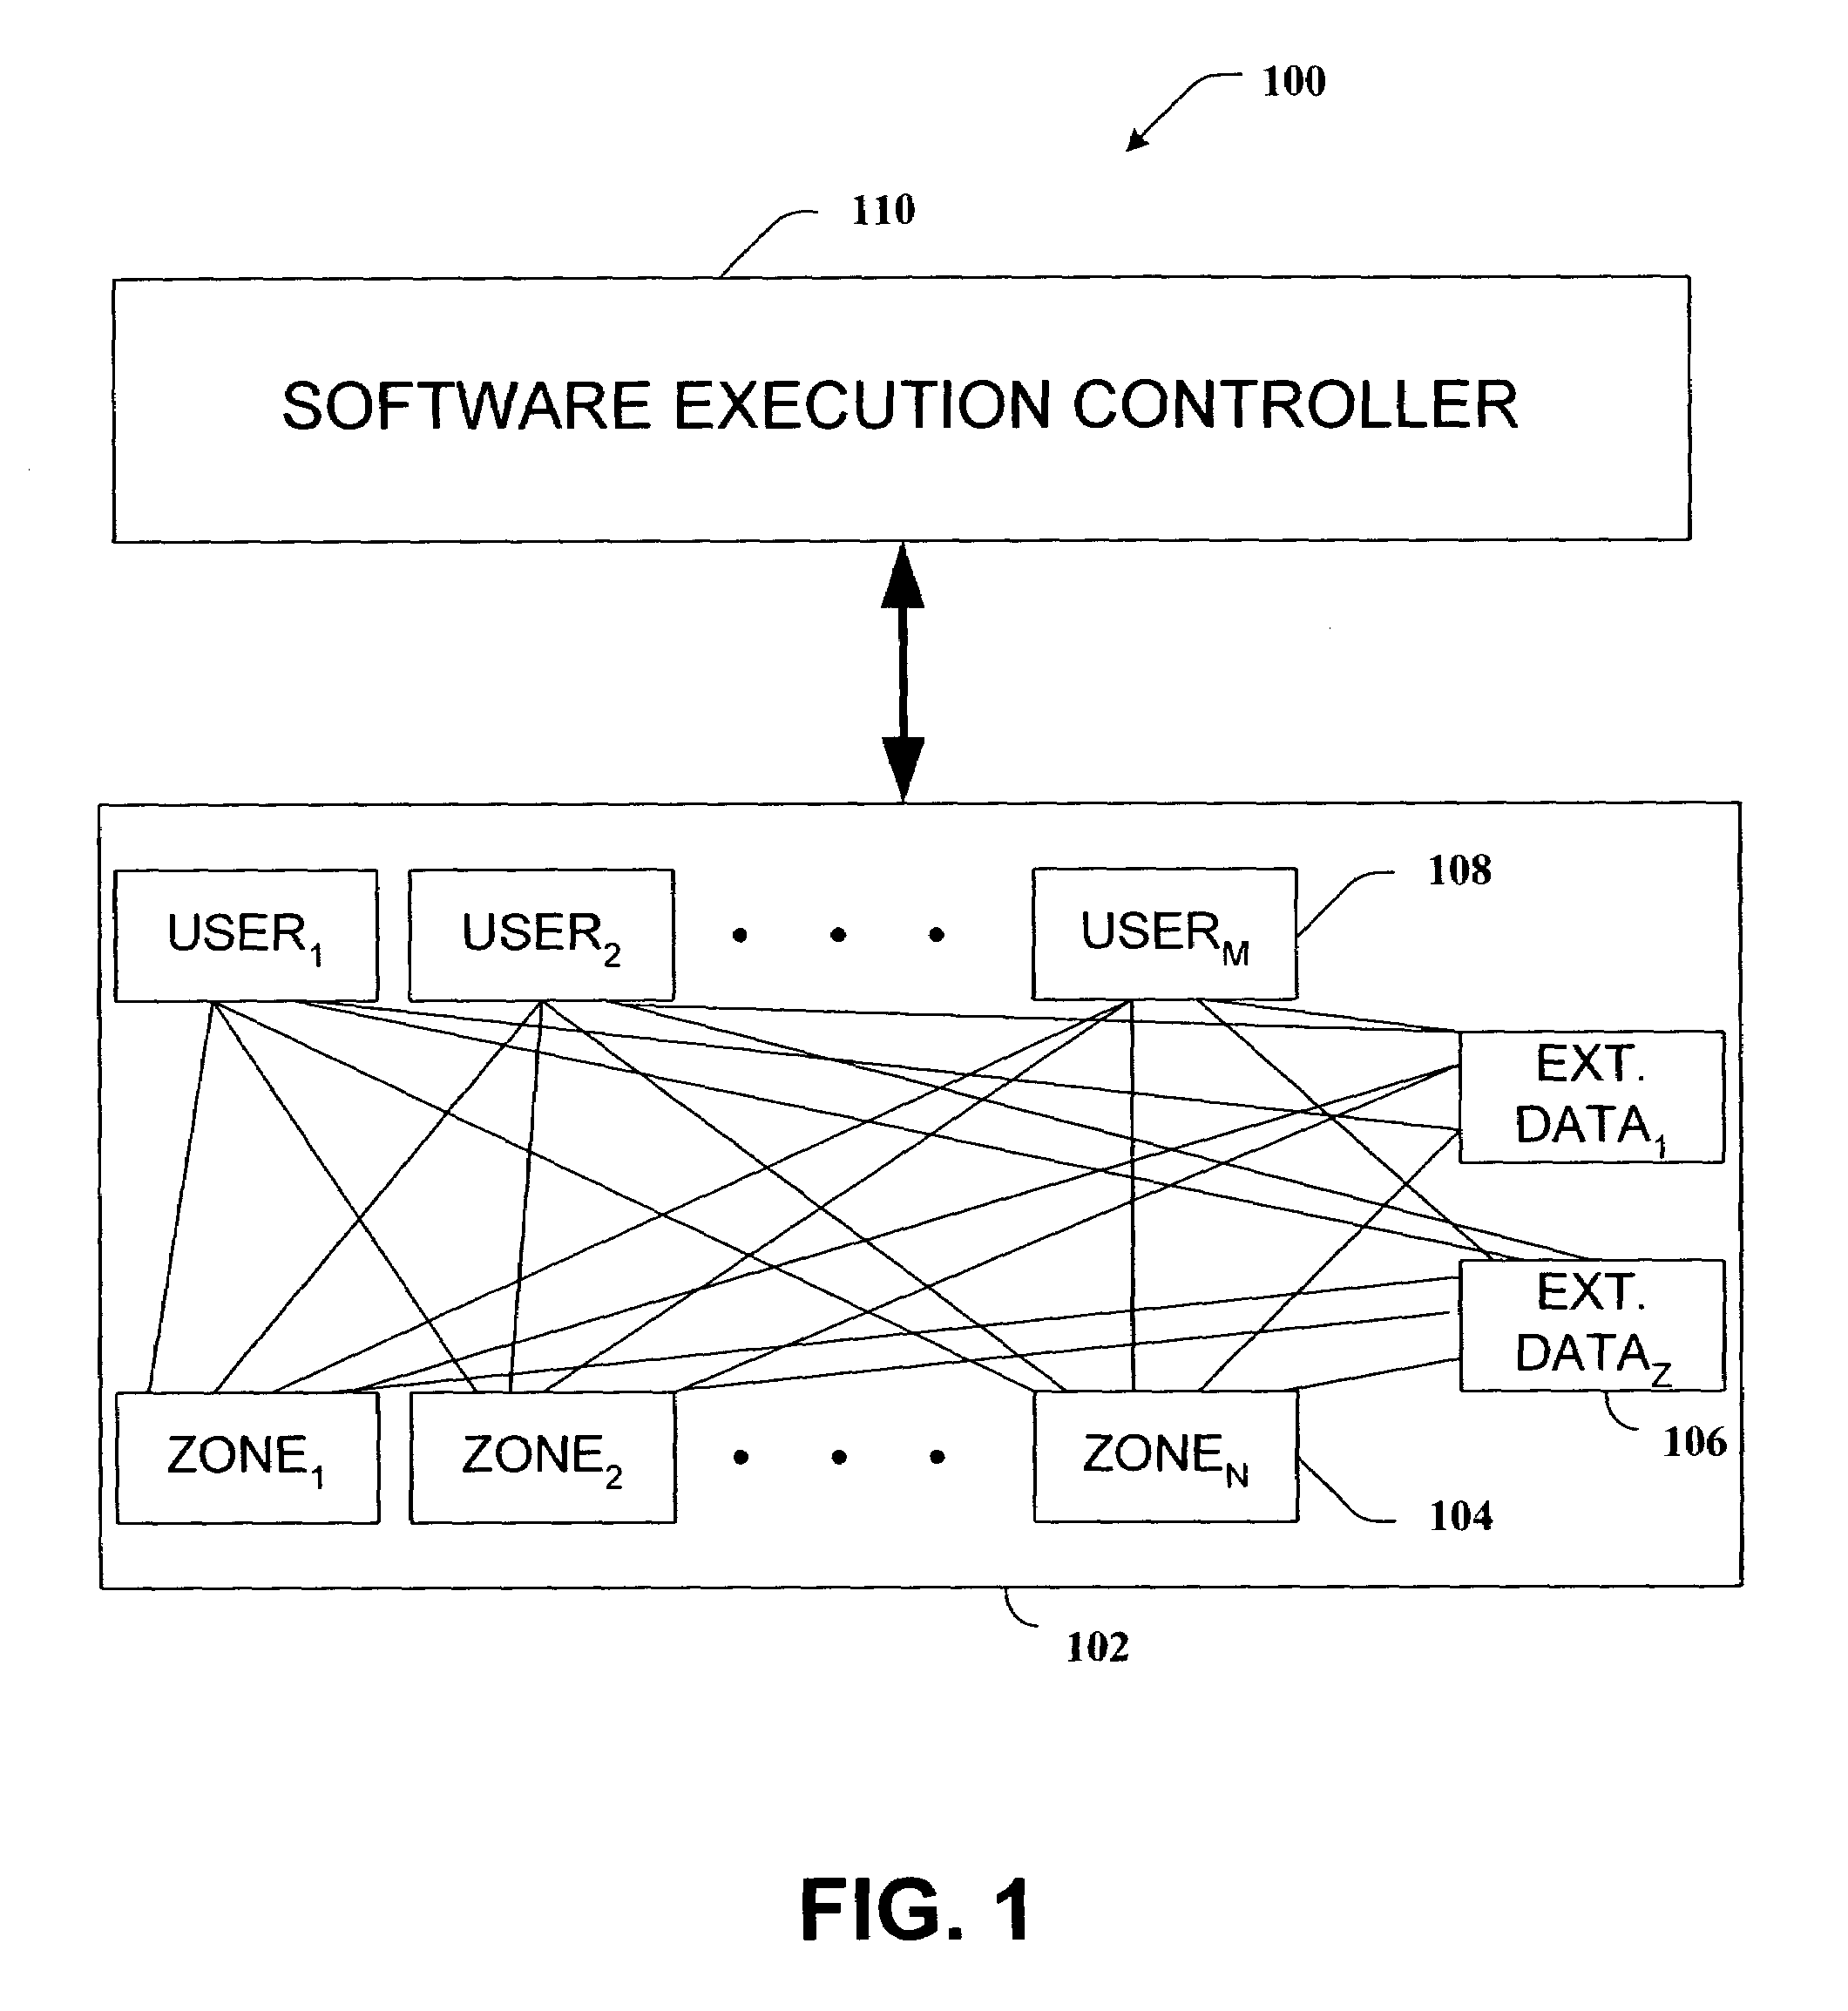 Location-based execution of software/HMI